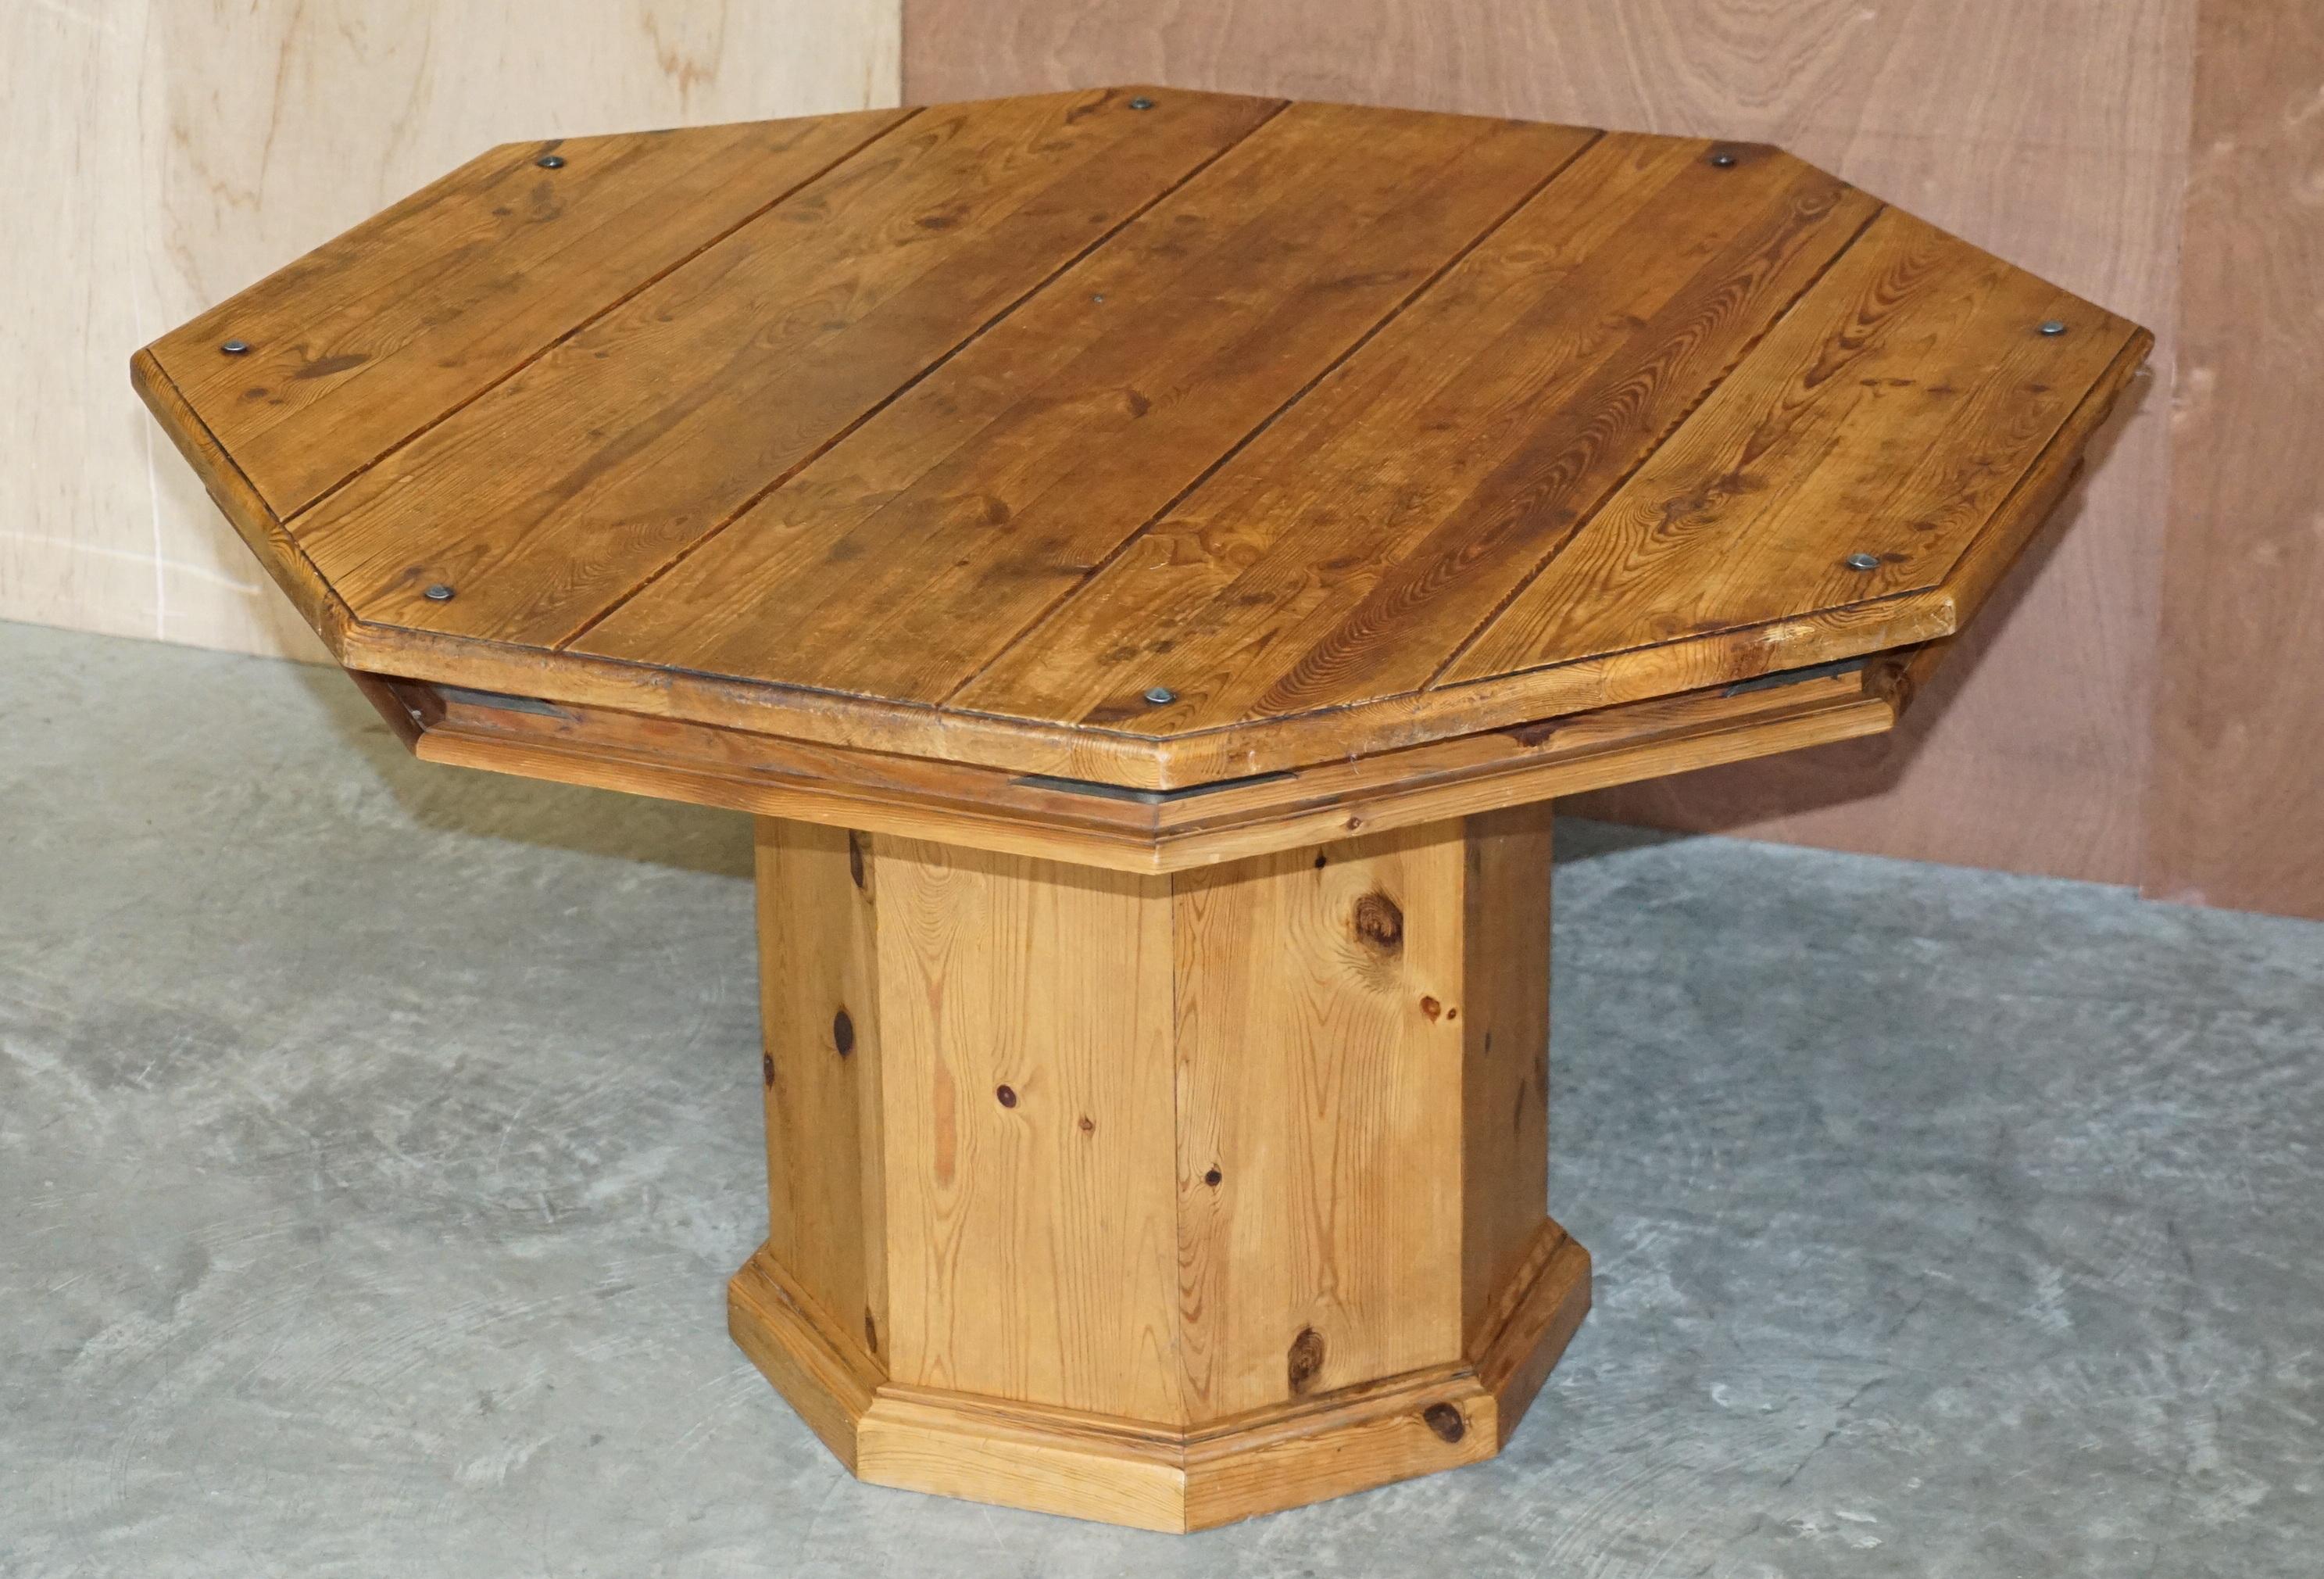 We are delighted to offer for sale this sublime vintage octagonal pine dining table with iron fixtures and fittings 

A very good looking and well made piece, it comes in two easy to transport sections, the top is one piece and the pedestal base